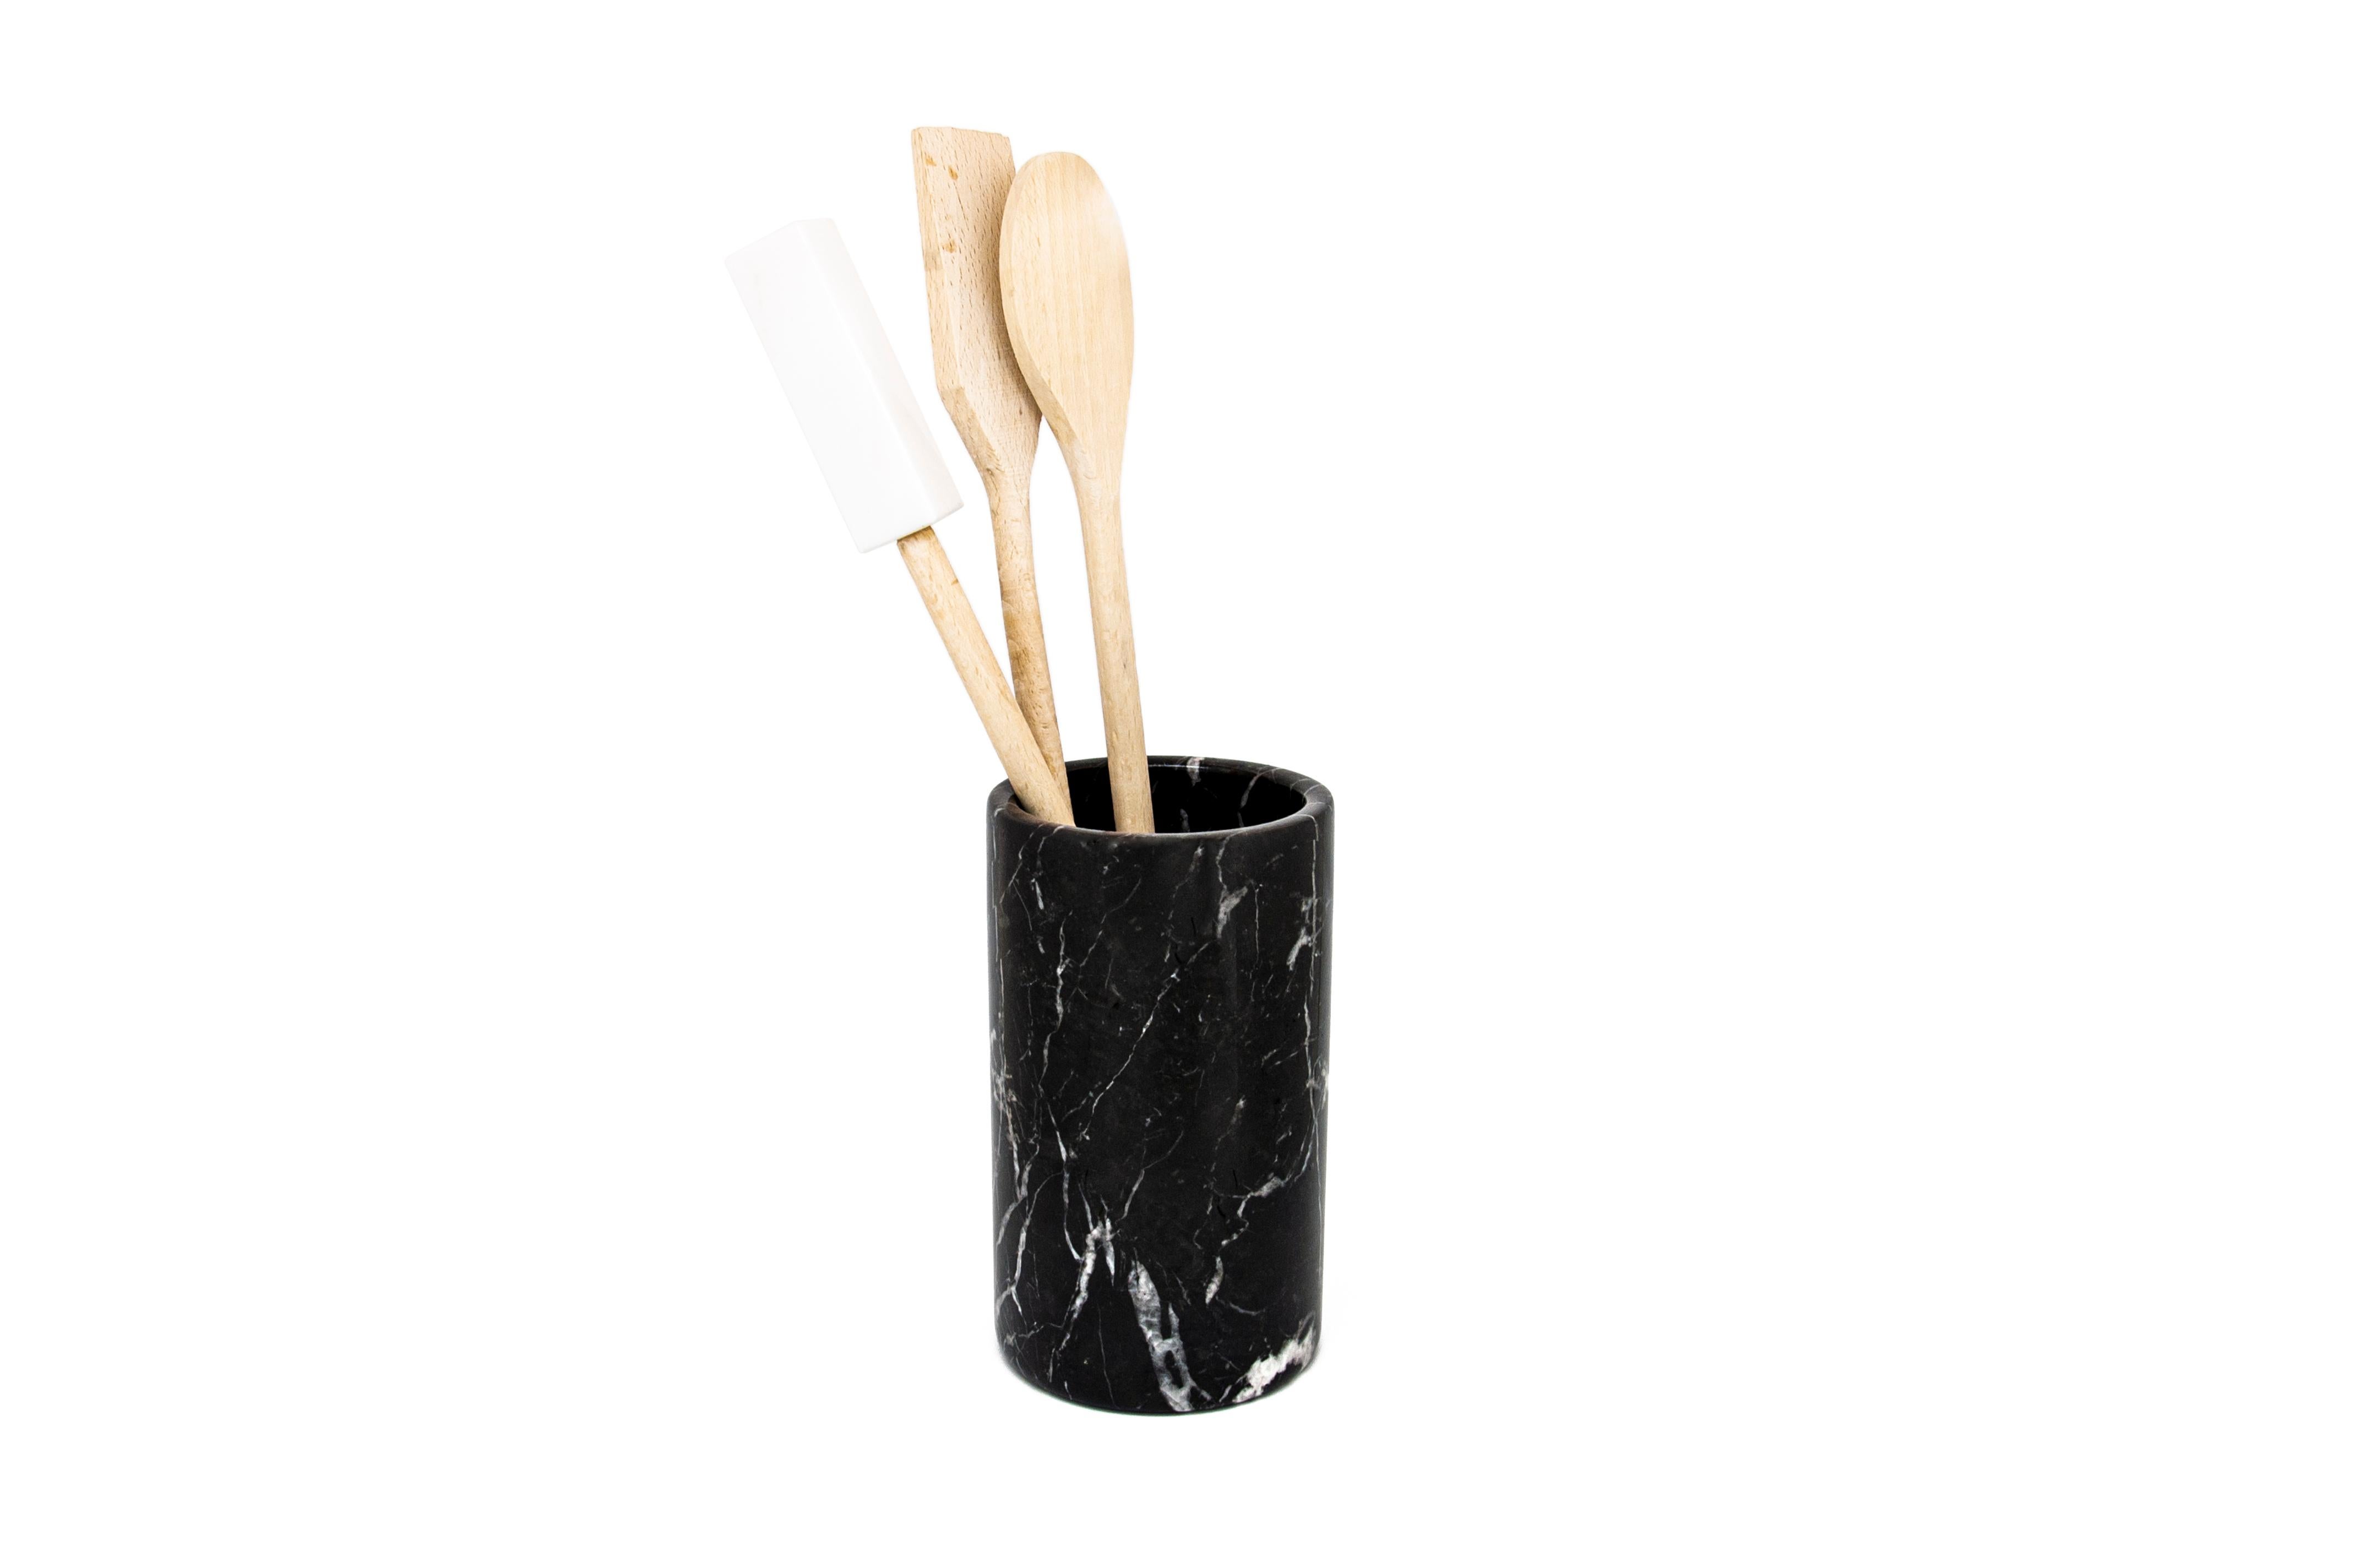 Black Marquina marble utensil holder, made in Italy, Carrara.
Each piece is in a way unique (since each marble block is different in veins and shades) and handcrafted in Italy. Slight variations in shape, color and size are to be considered a